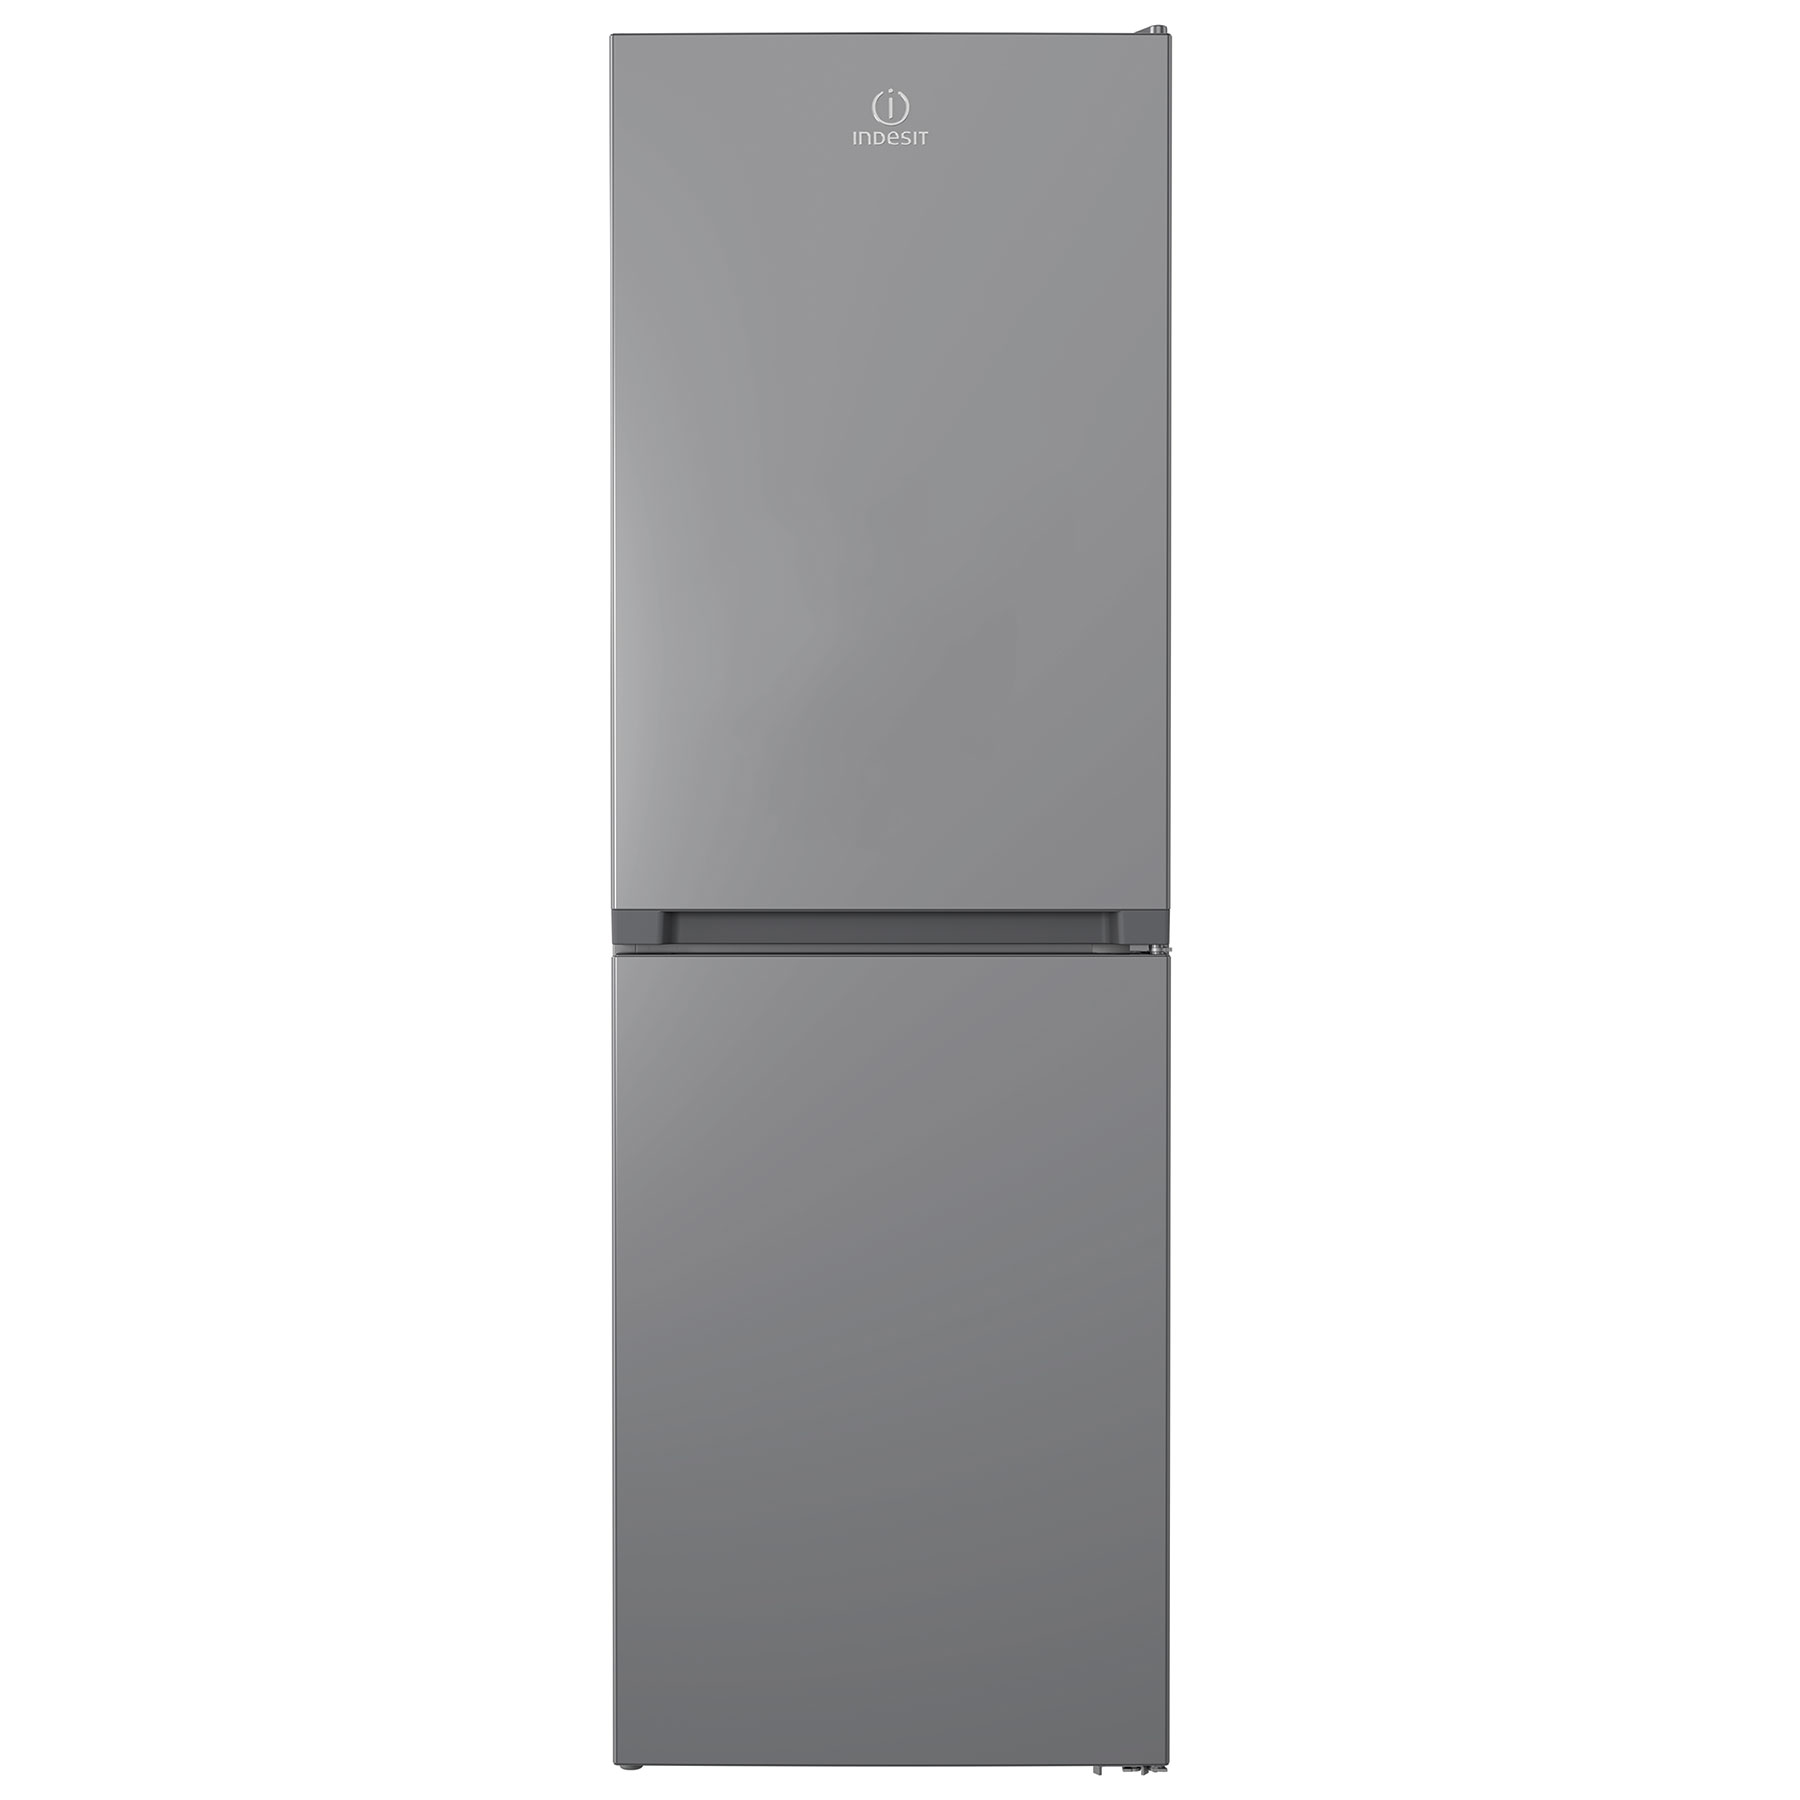 Indesit IBTNF60182S 60cm Frost Free Fridge Freezer in Silver 1 86m E R